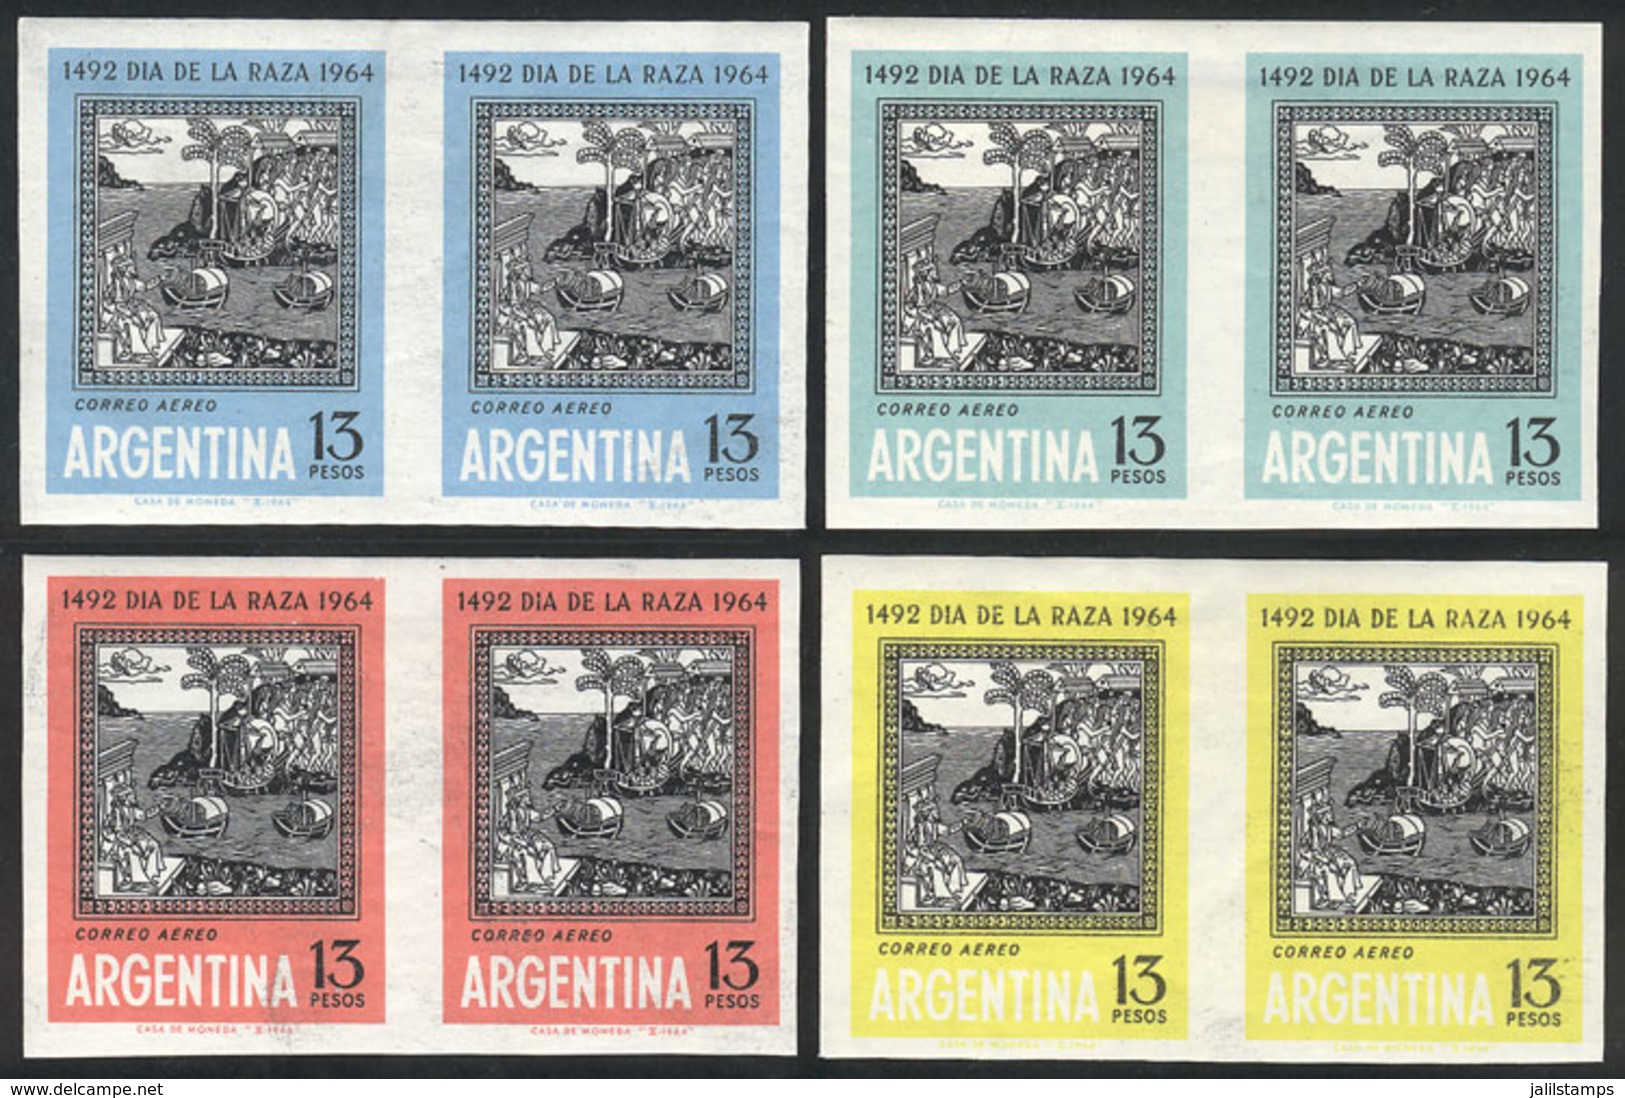 ARGENTINA: GJ.1287, 1964 Discovery Of America, TRIAL COLOR PROOFS, 4 Imperforate Pairs Printed On Gummed Paper With Wate - Airmail